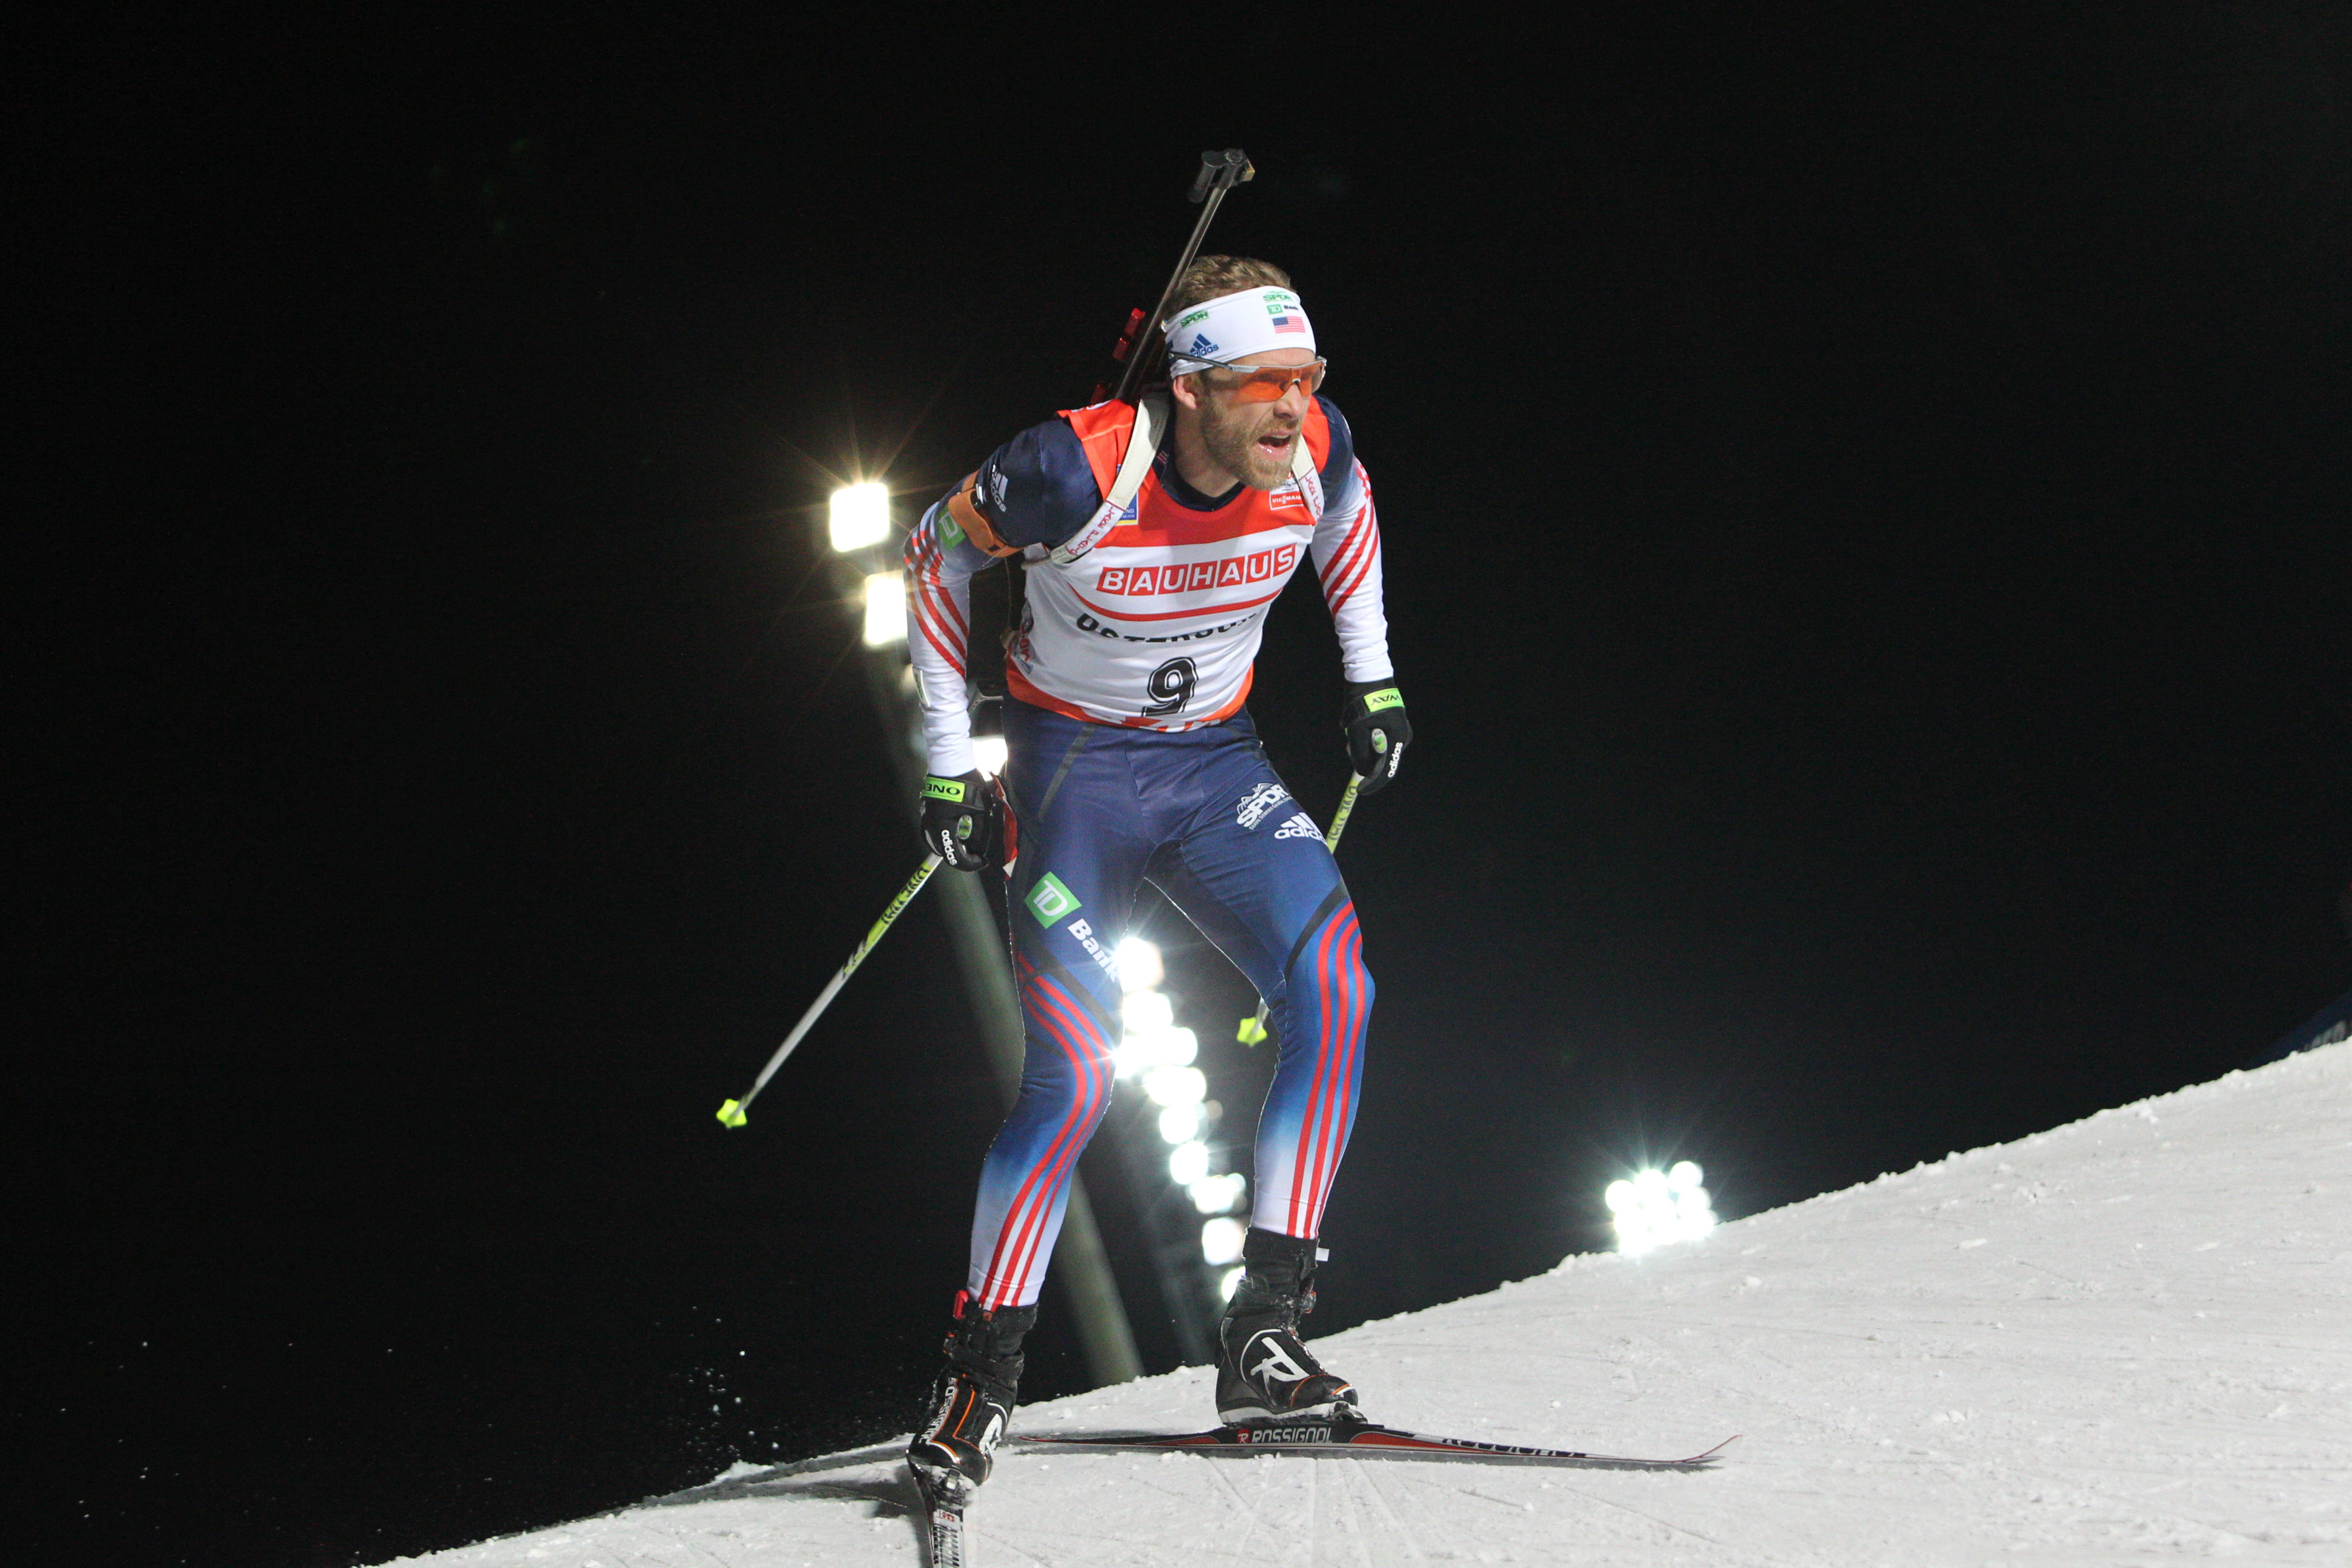 New Biathlon World Cup Season Begins in Ostersund with Women’s and Men’s Individual Races